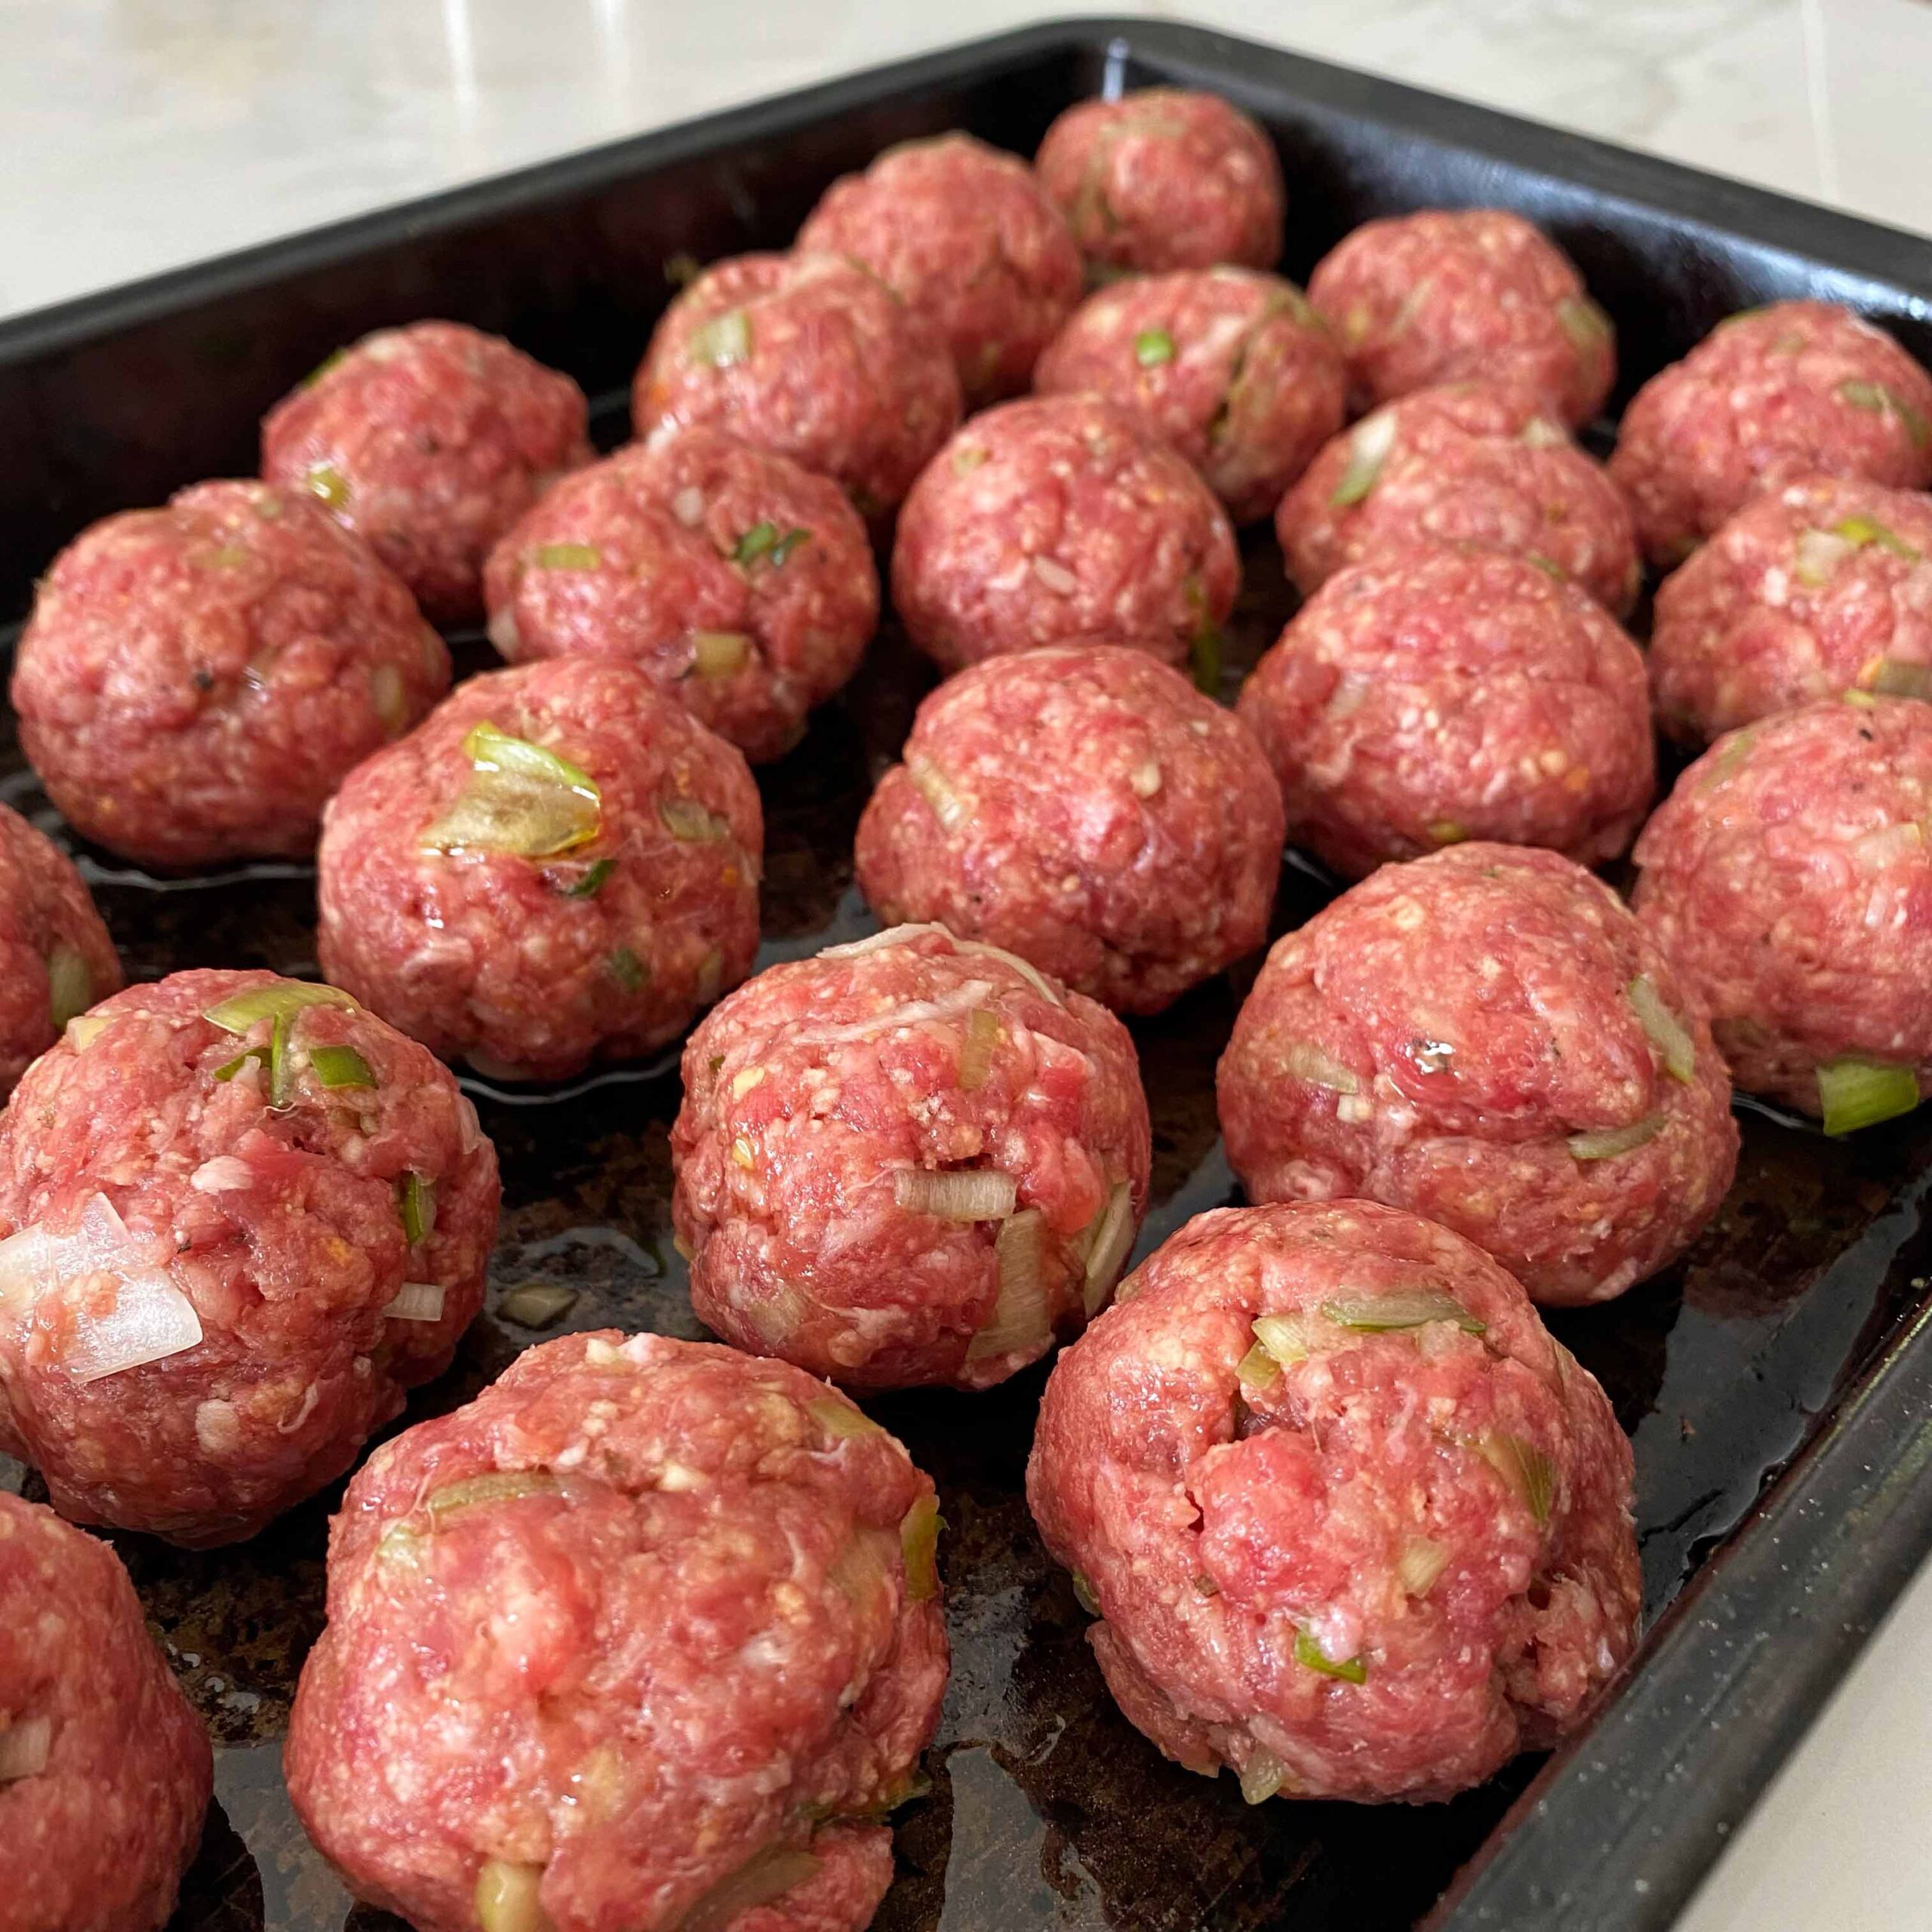 Rolled meatballs on a baking tray.